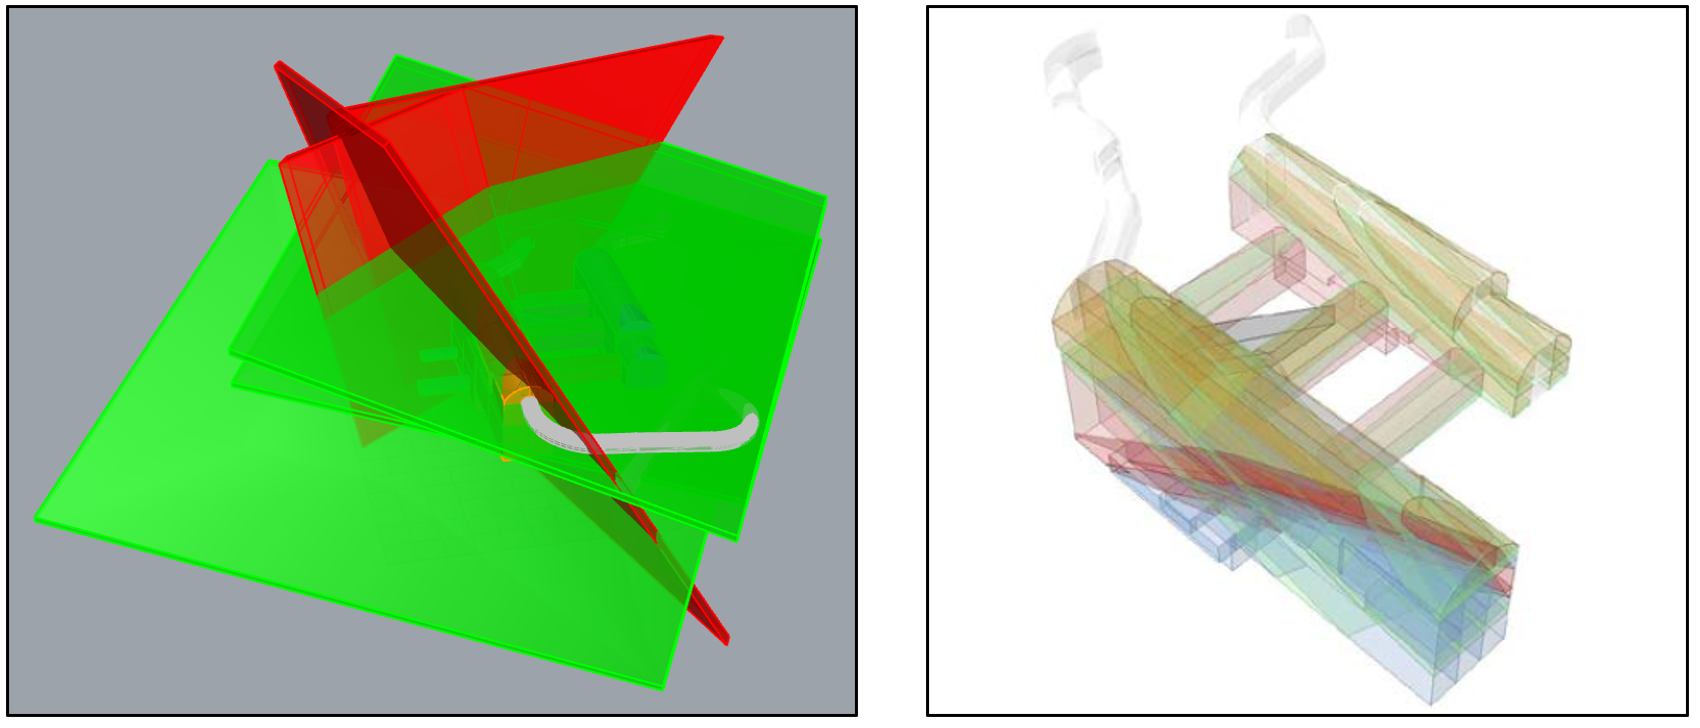 Figure 2: 3D representation of fault systems (in red) and pyroclastic layers (in green) around the cavern complex (left), lithologies on excavation zones in RS3 (right)